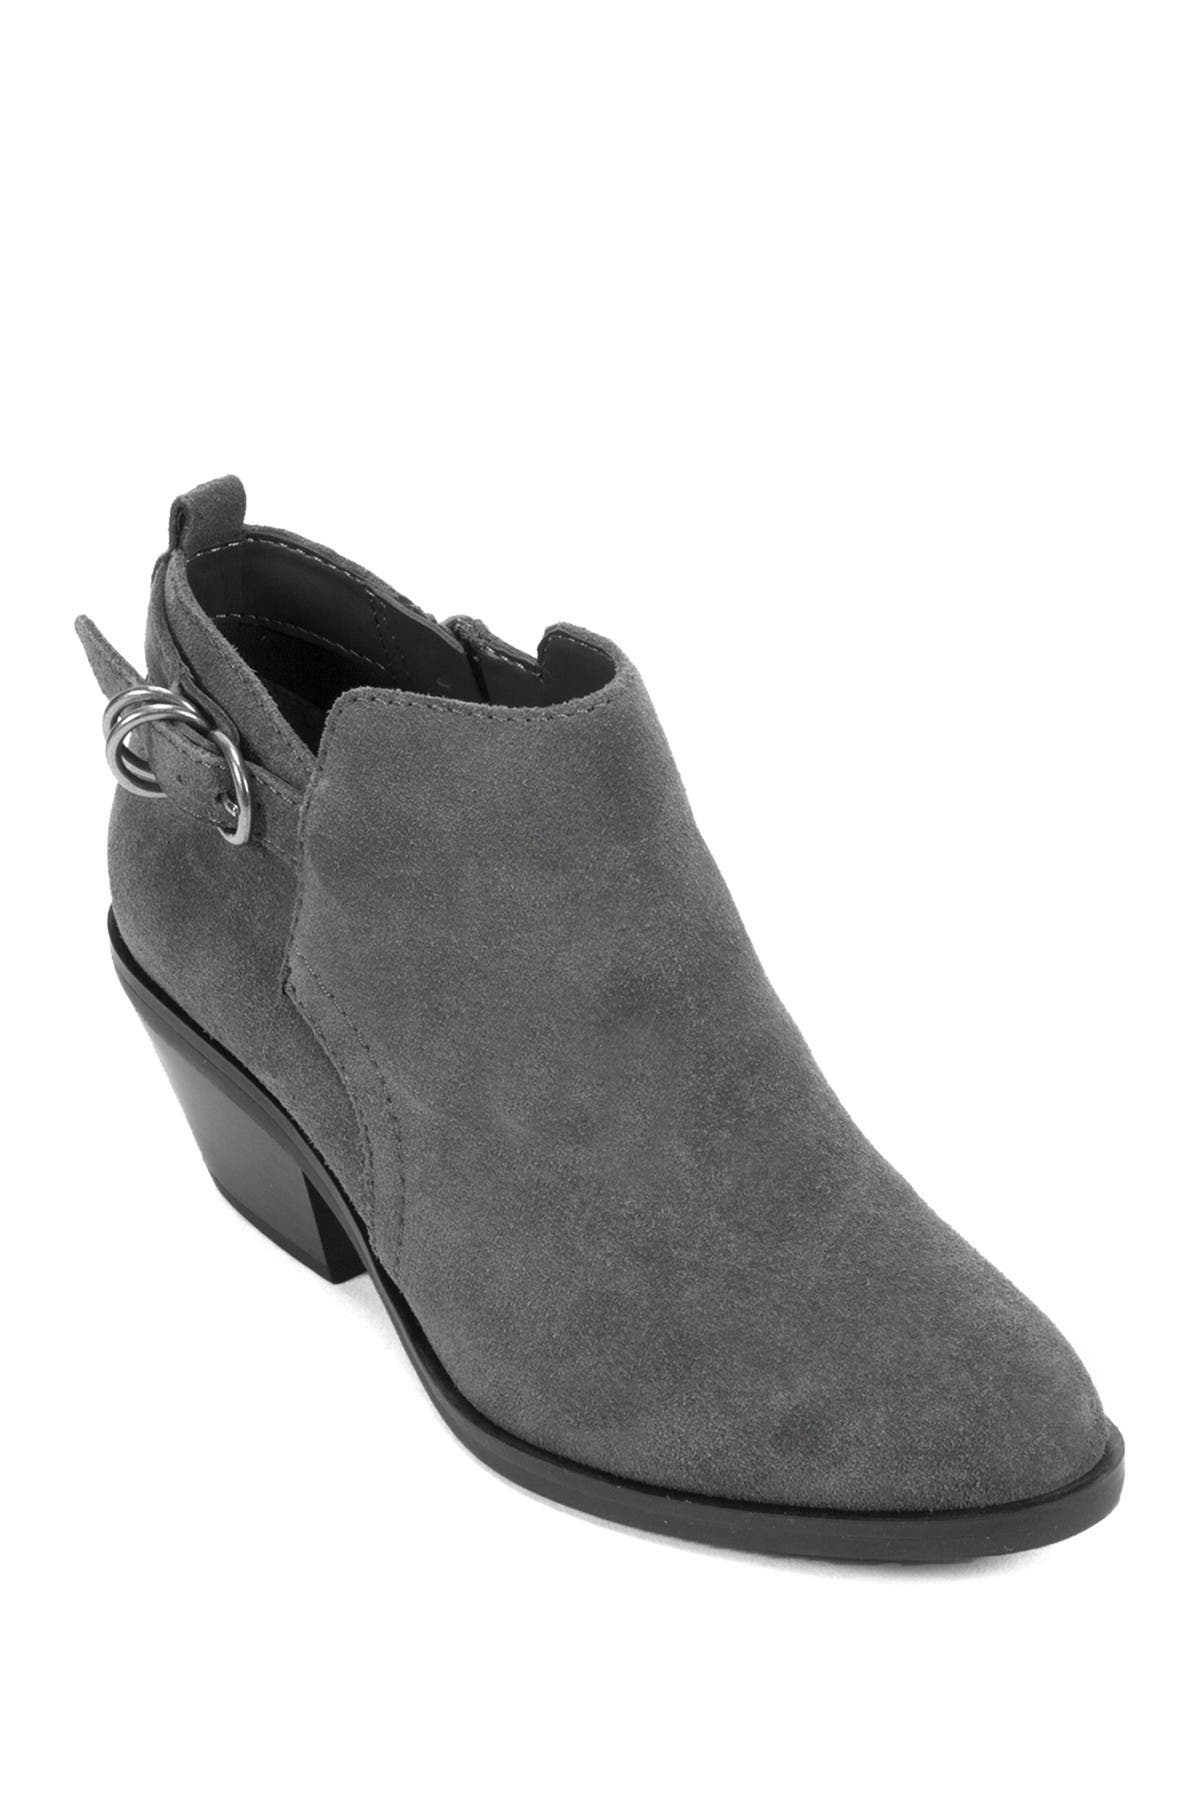 white mountain black suede boots